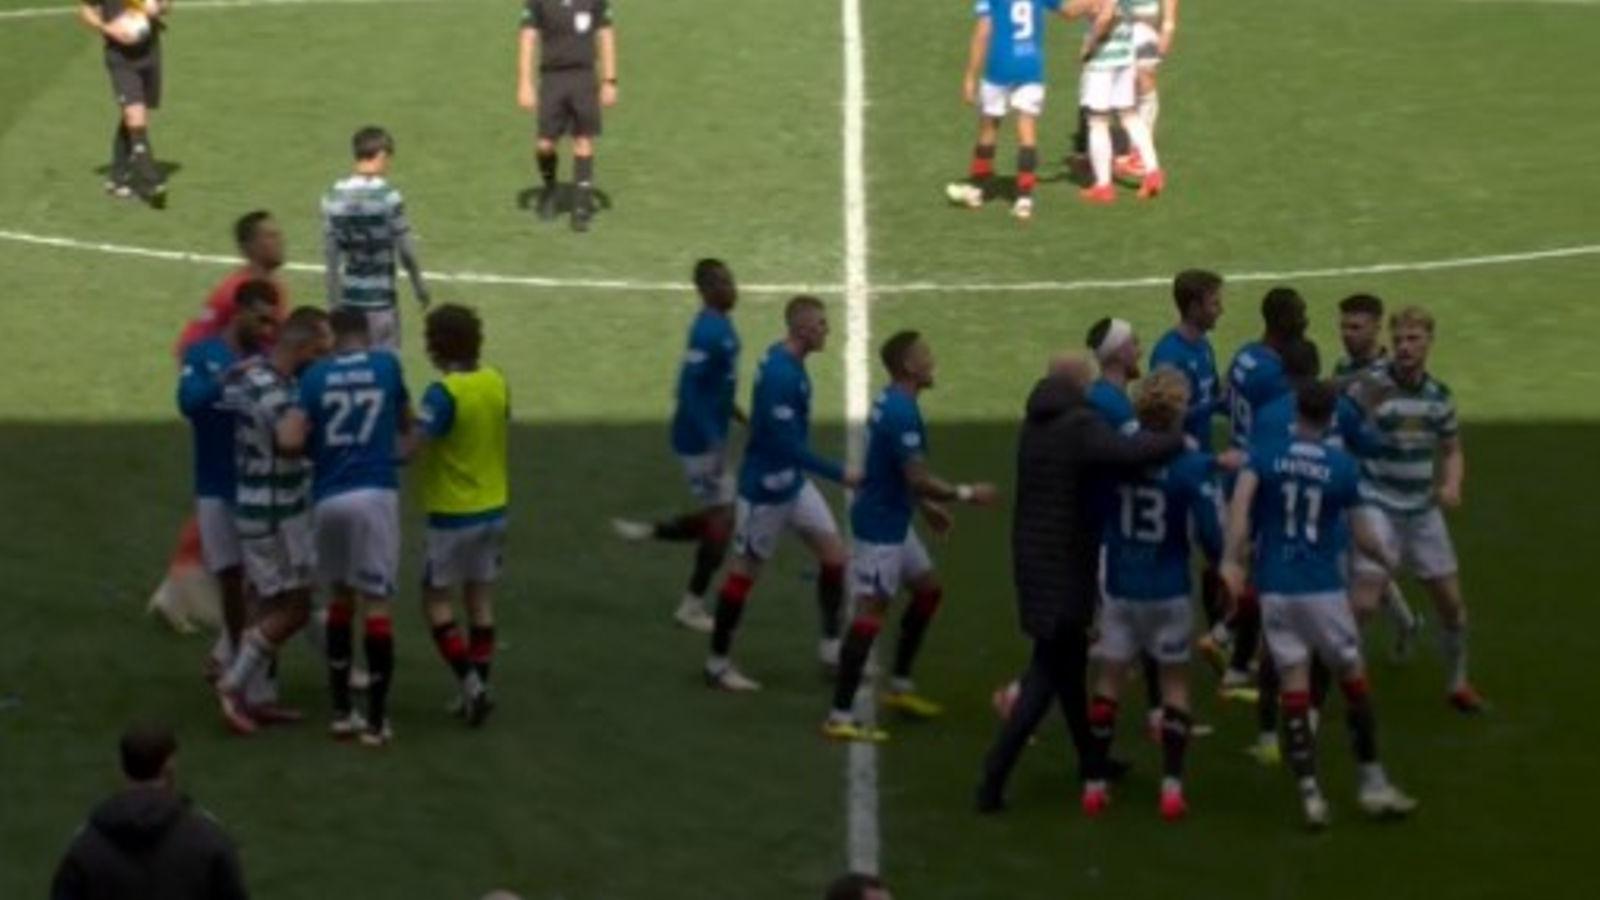 Rangers and Celtic players had to be separated at full-time of Sunday's Old Firm derby